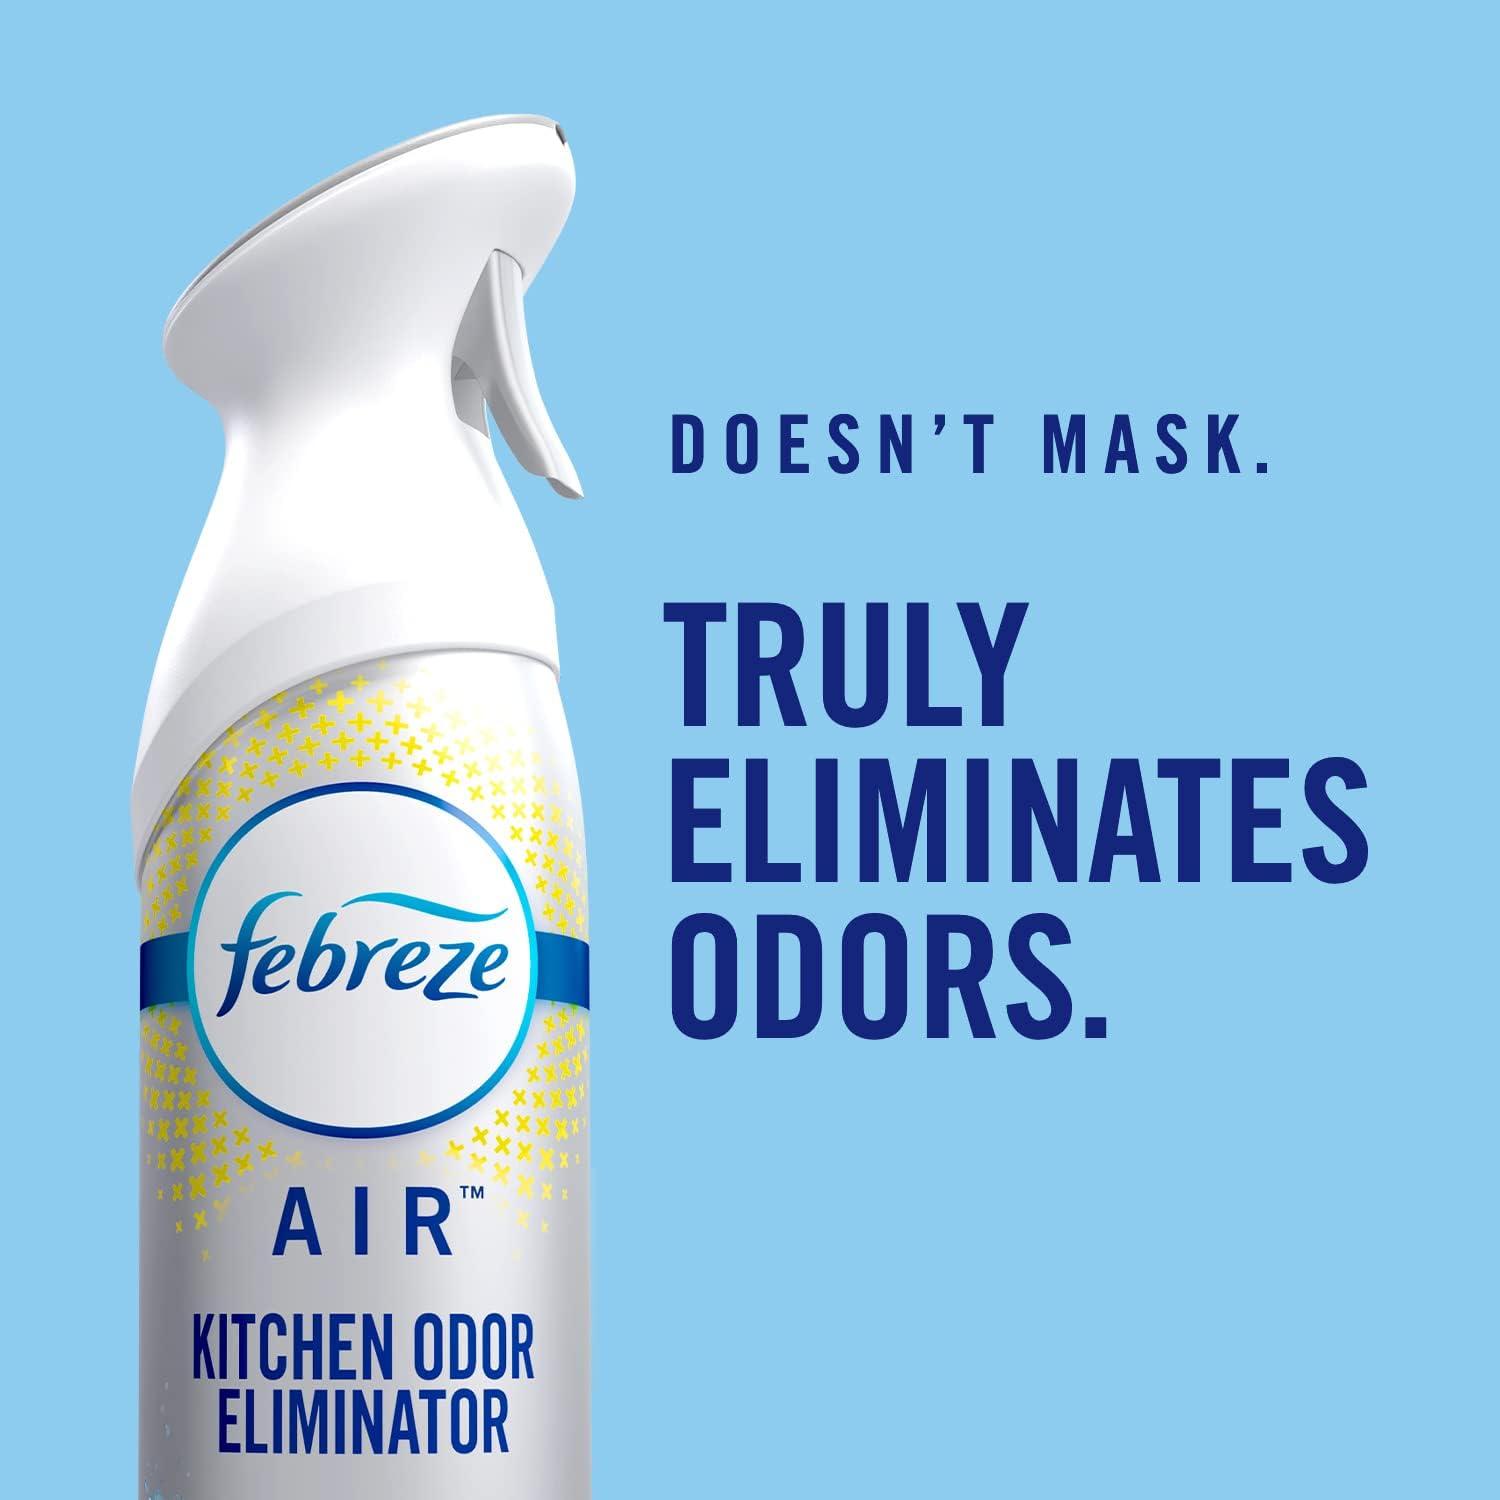 Can Febreze Air Effects really eliminate odors?